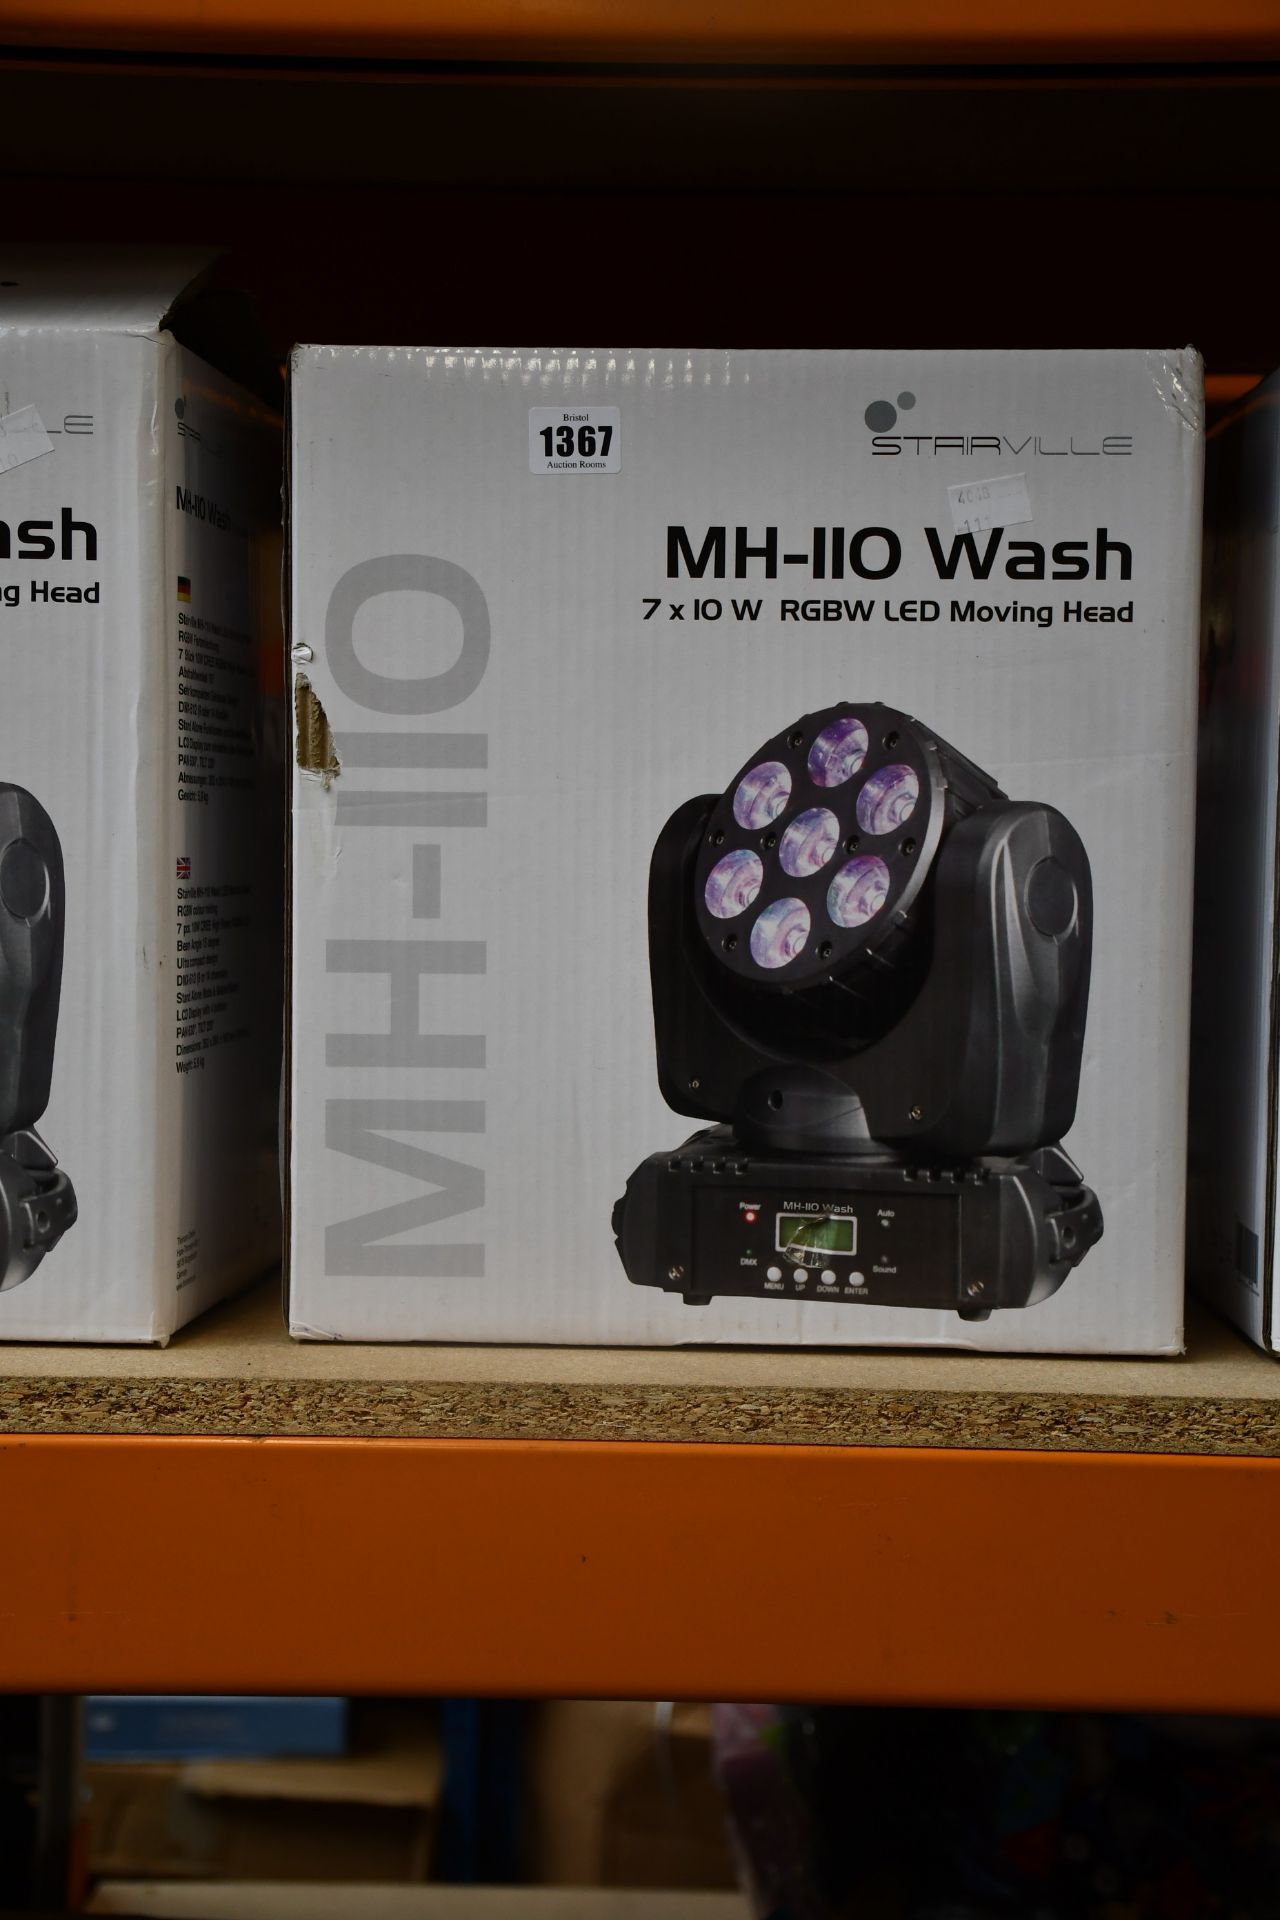 One boxed as new Stairville MH-110 Wash LED Moving Head.